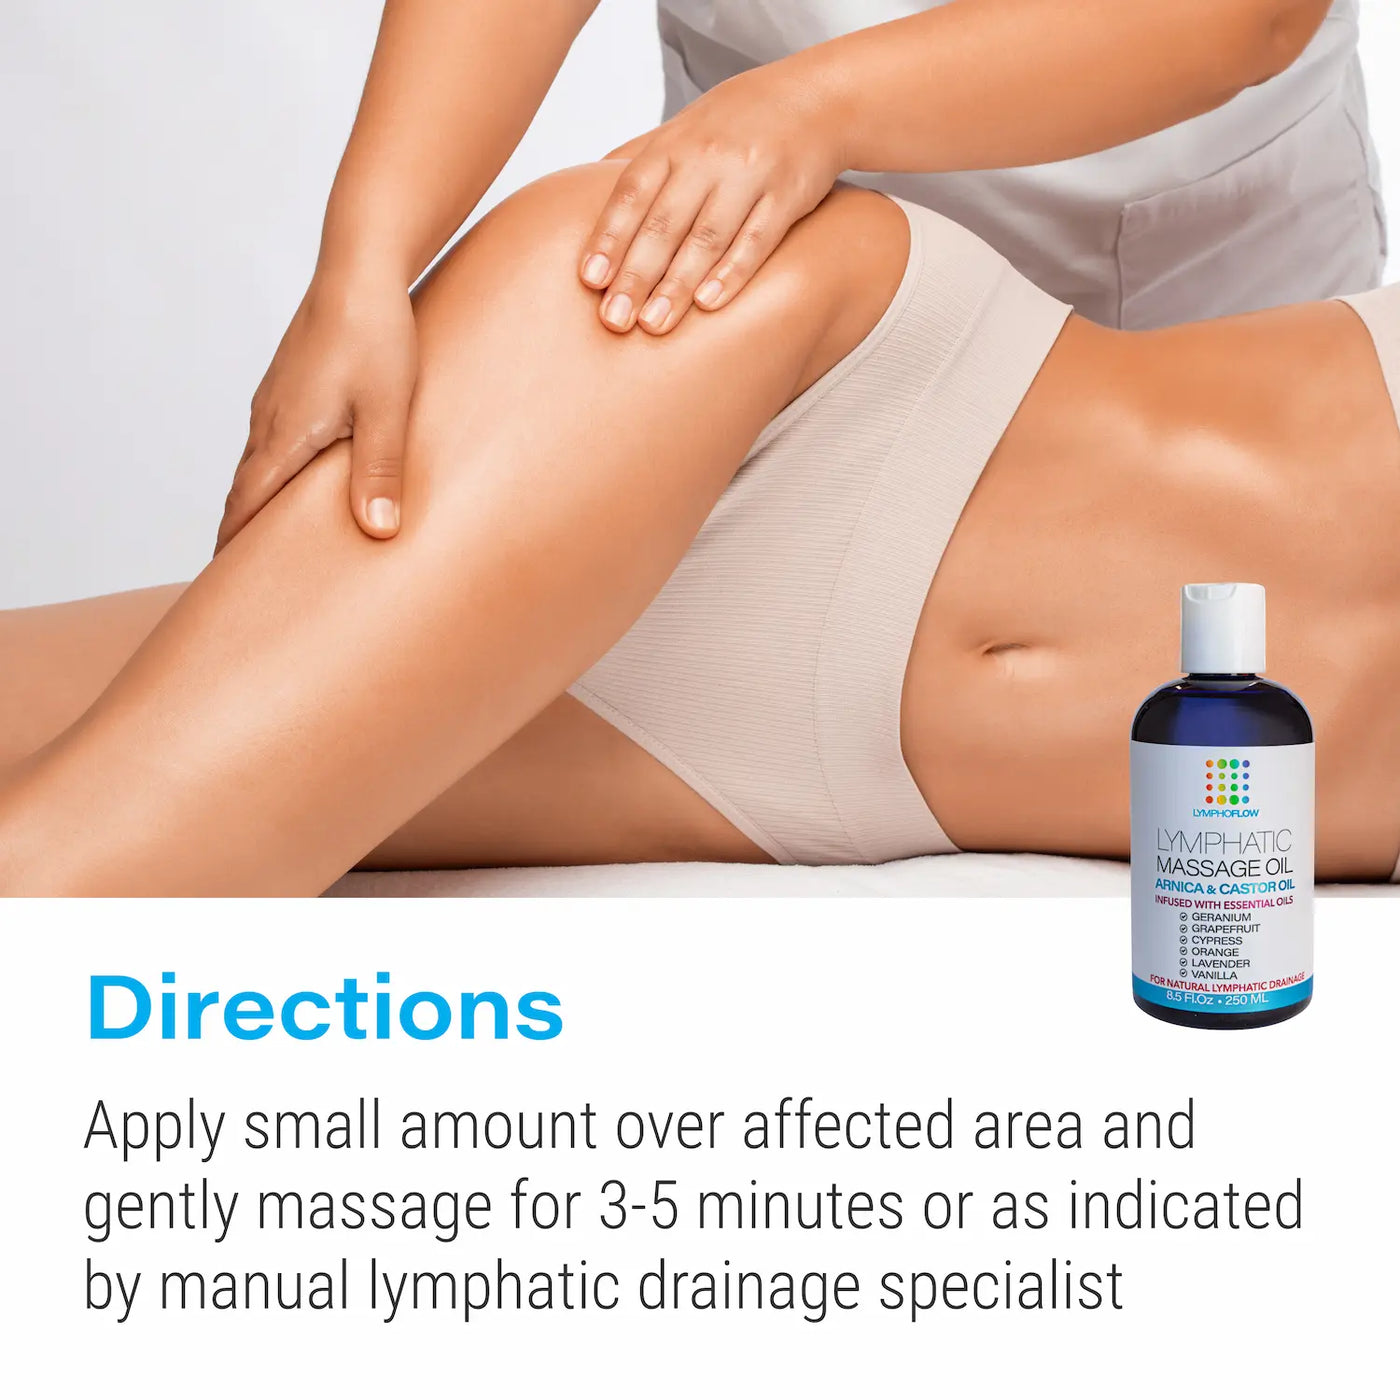 LYMPHATIC MASSAGE OIL WITH ARNICA & CASTOR OIL